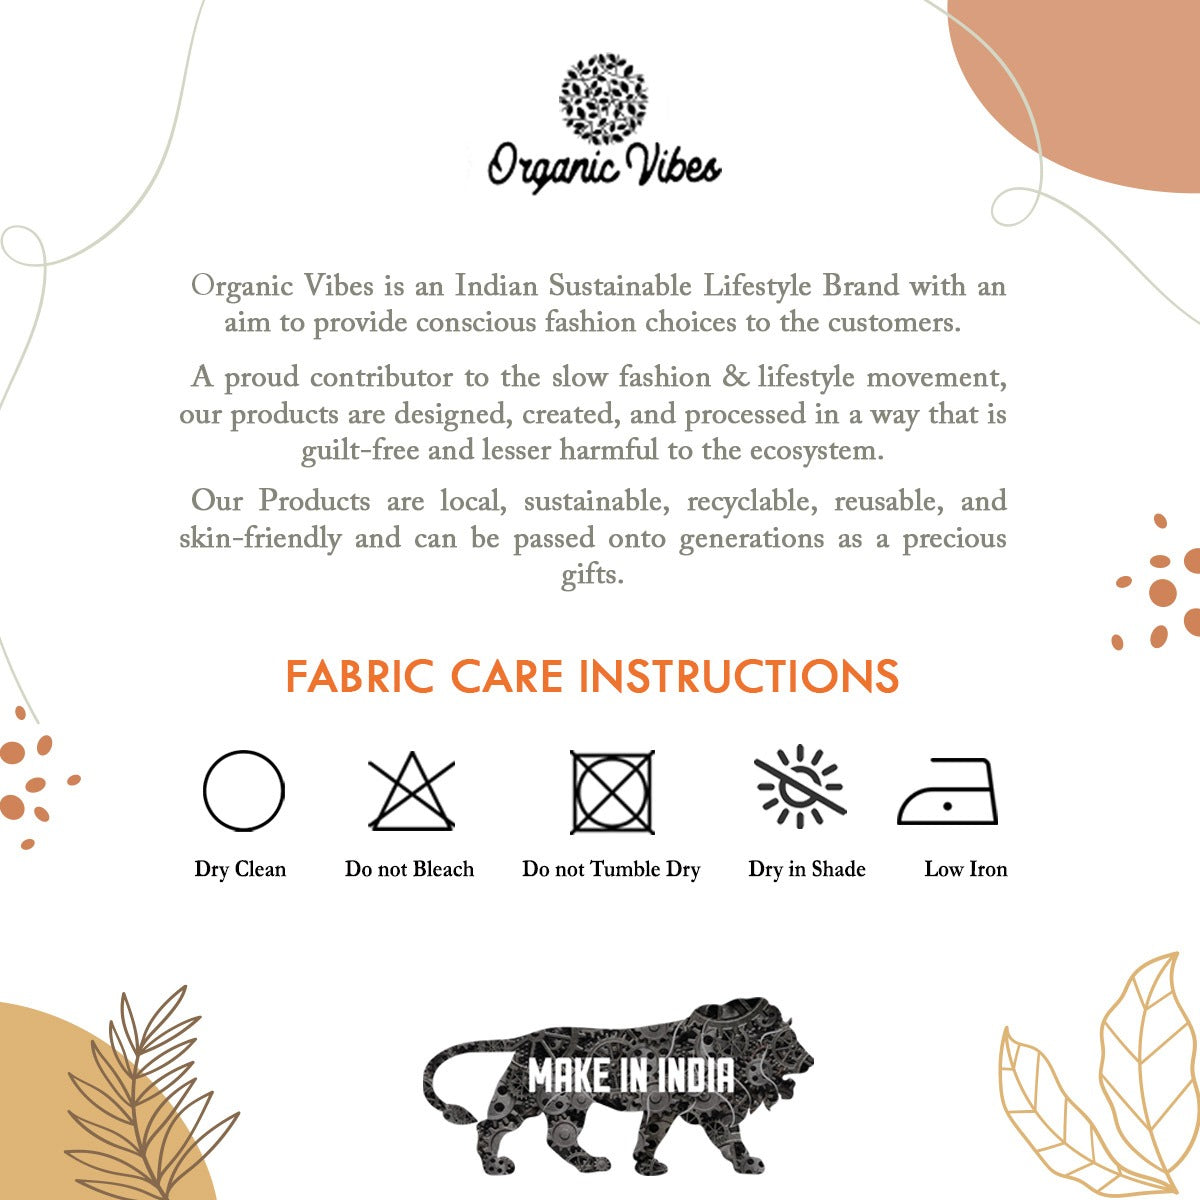 Organic Vibes Clothing Care Guide